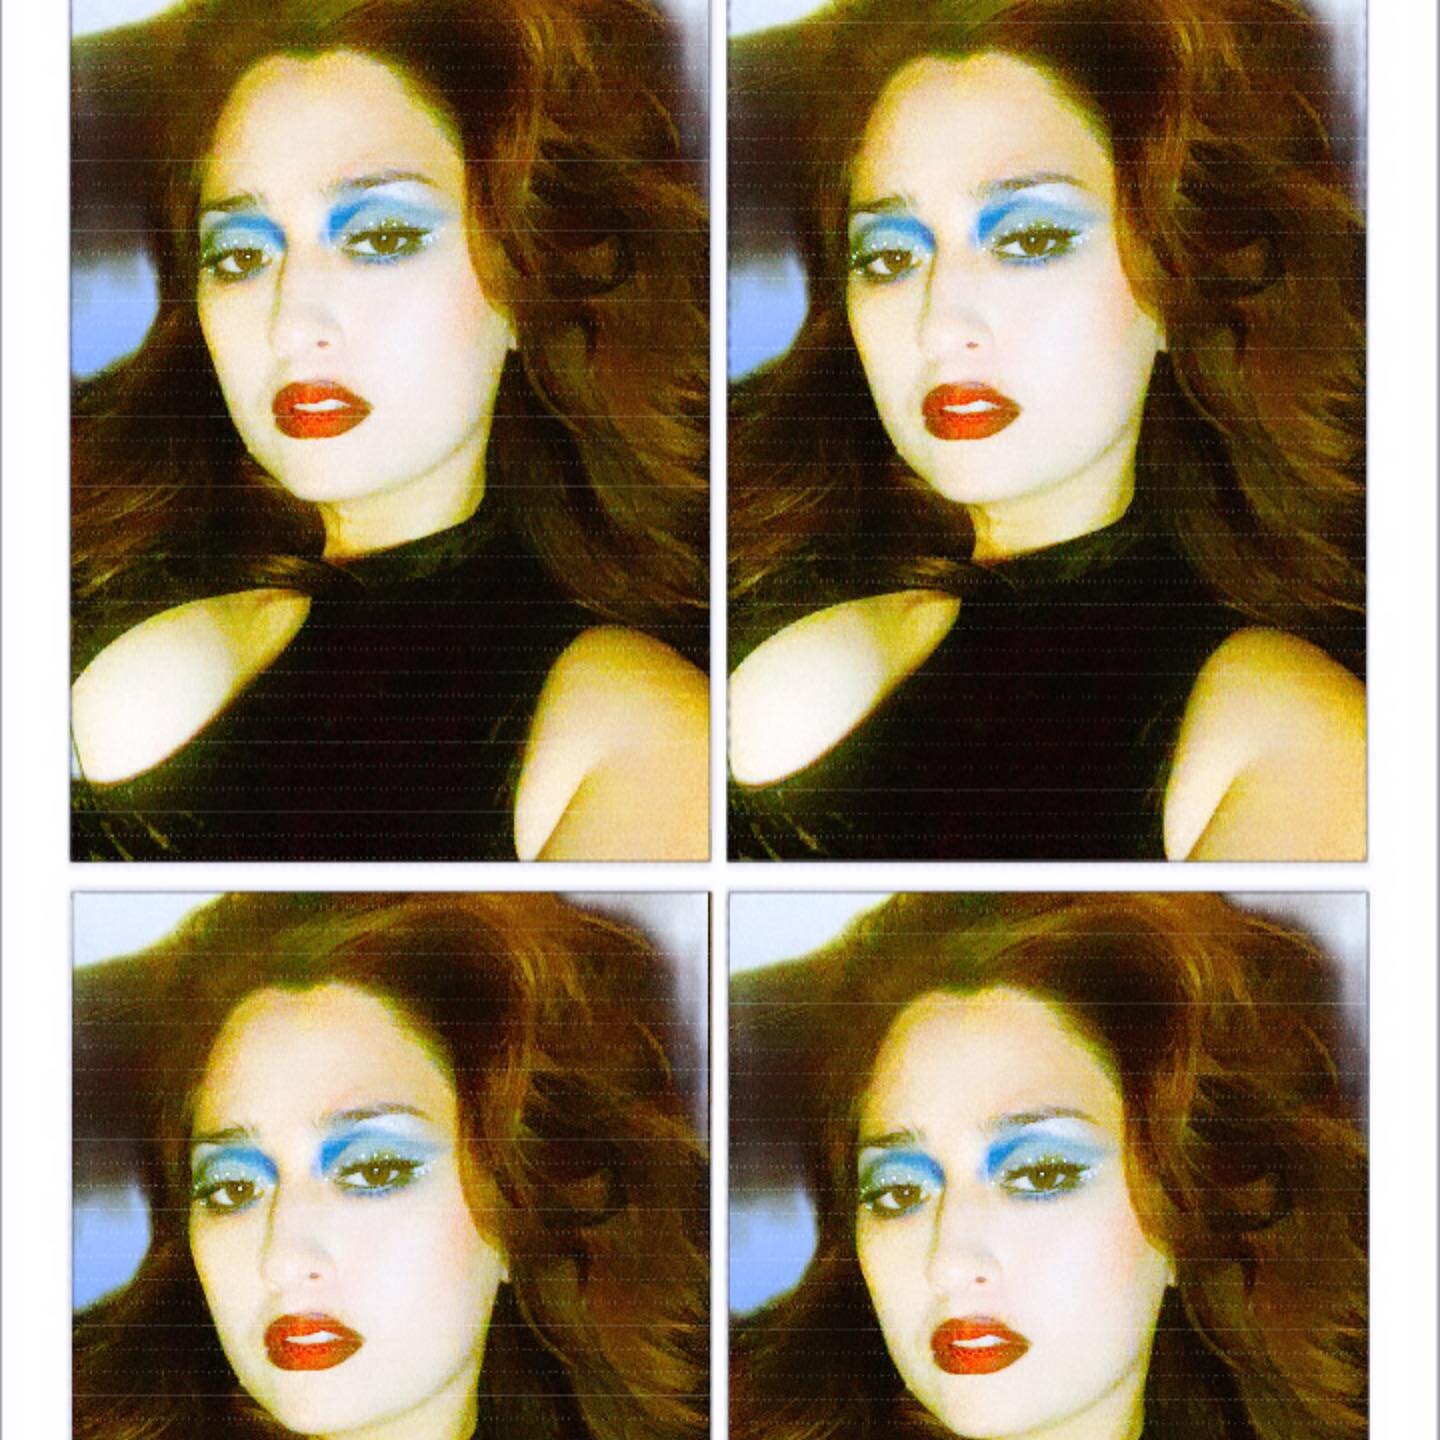 ✨ NOT OF THIS EARTH ✨
Traci lords movie poster inspo 

#mua #vhs #makeup #blueeyeshadow #redlips